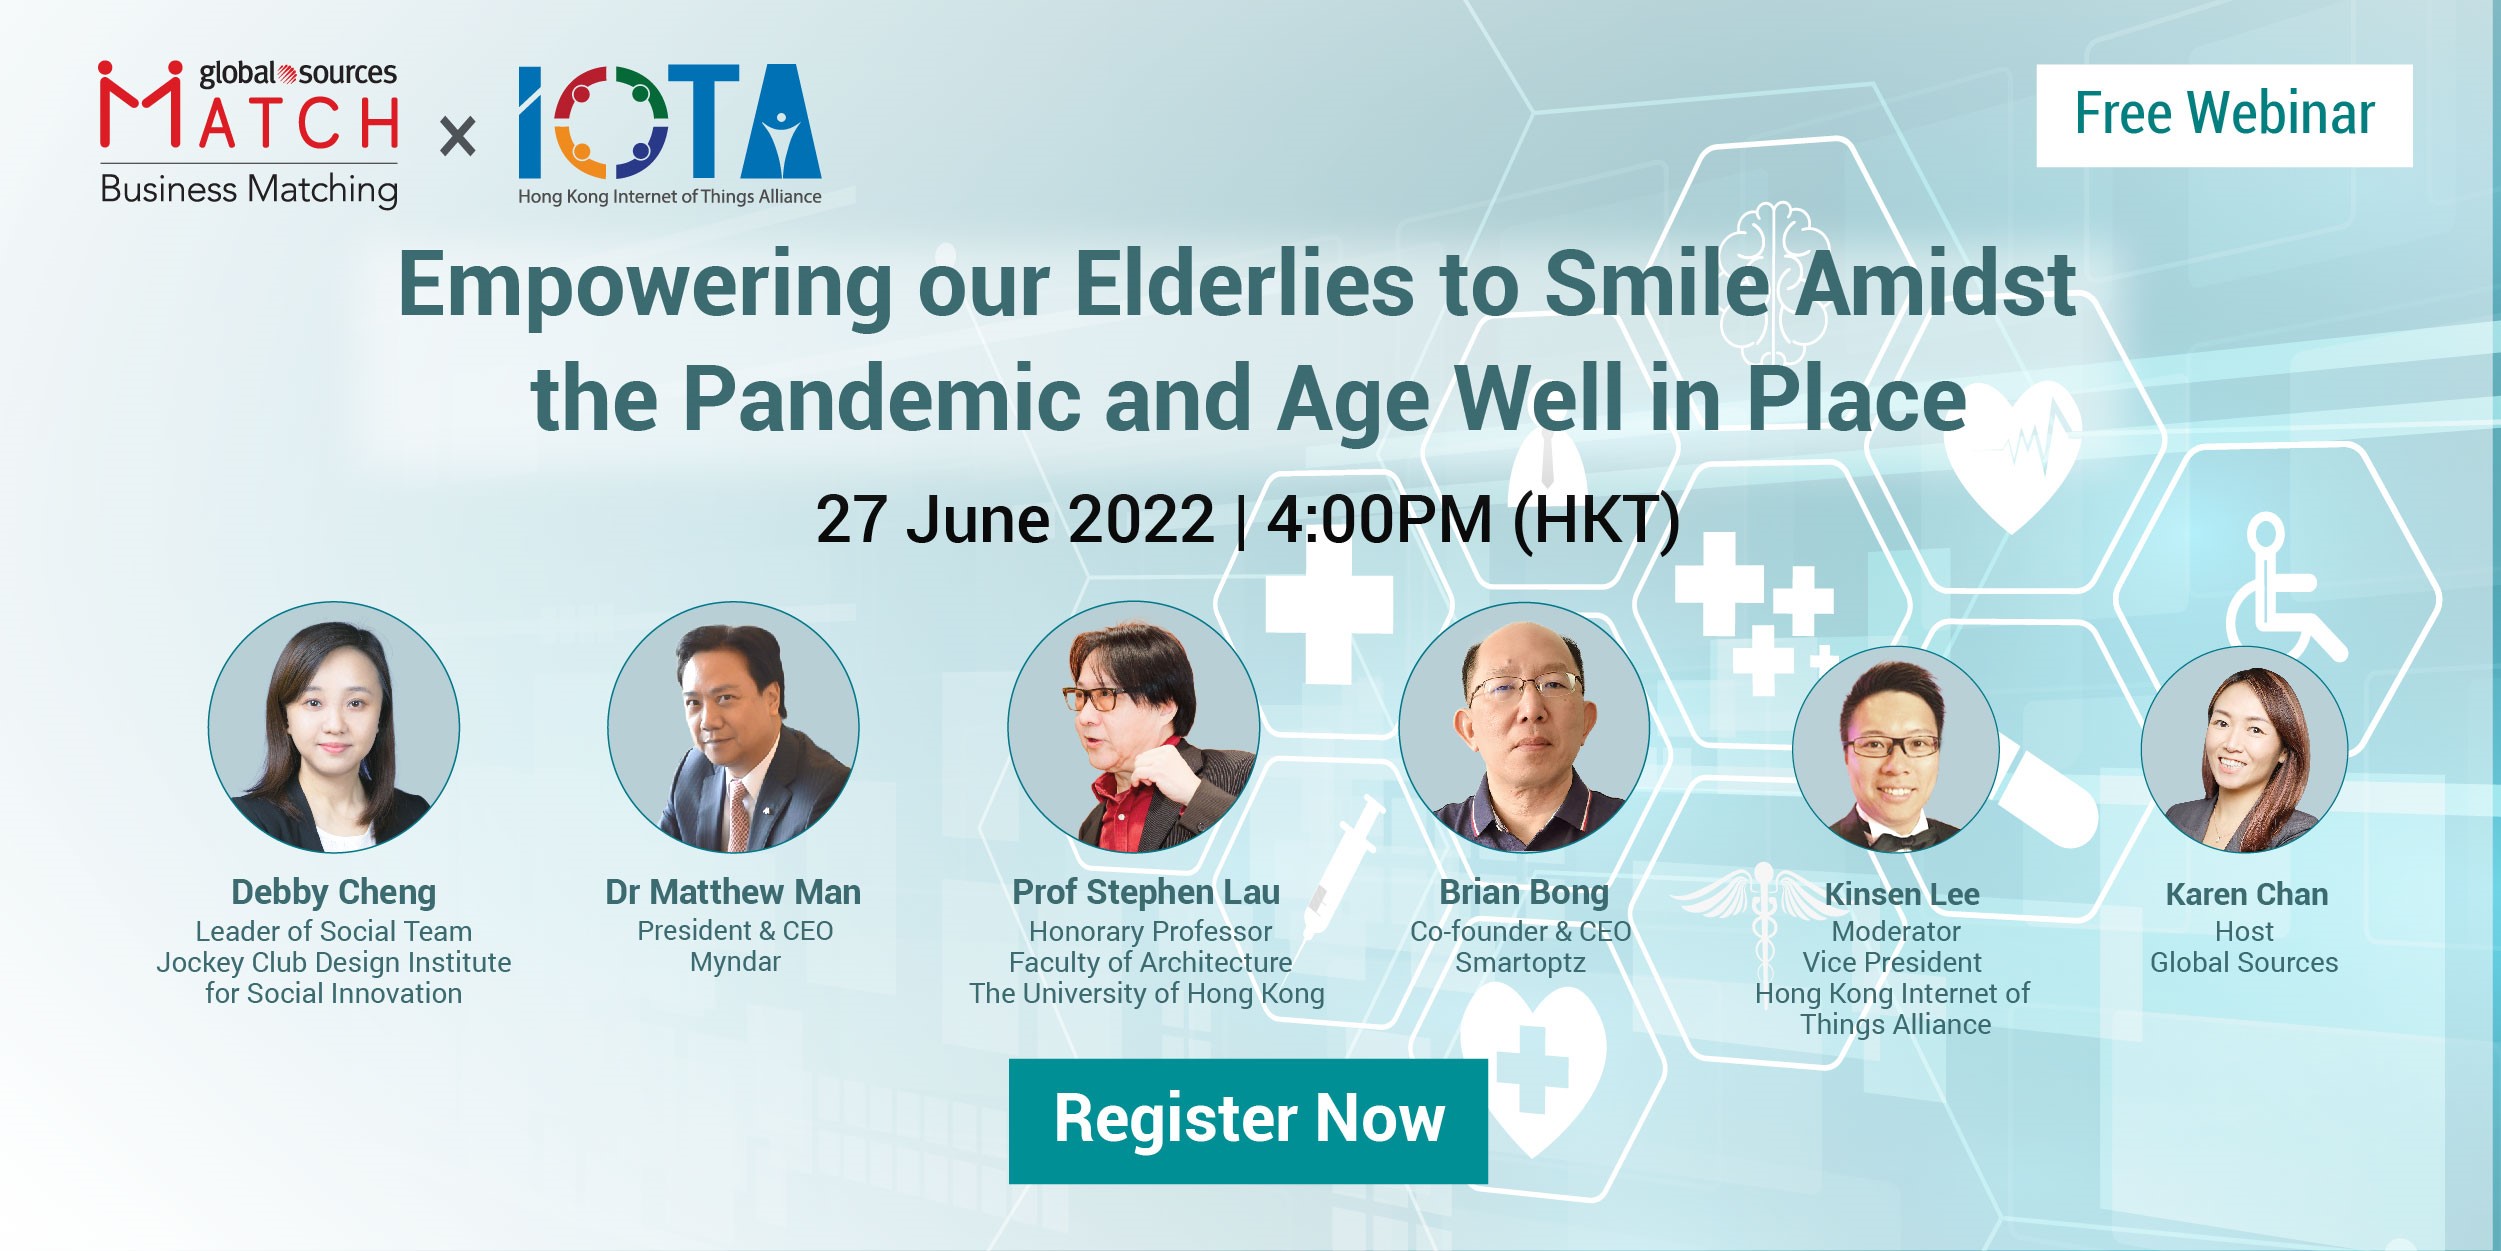 Global Sources MATCH: Empowering Our Elderlies to Smile Amidst the Pandemic and Age Well in Place, Online Event